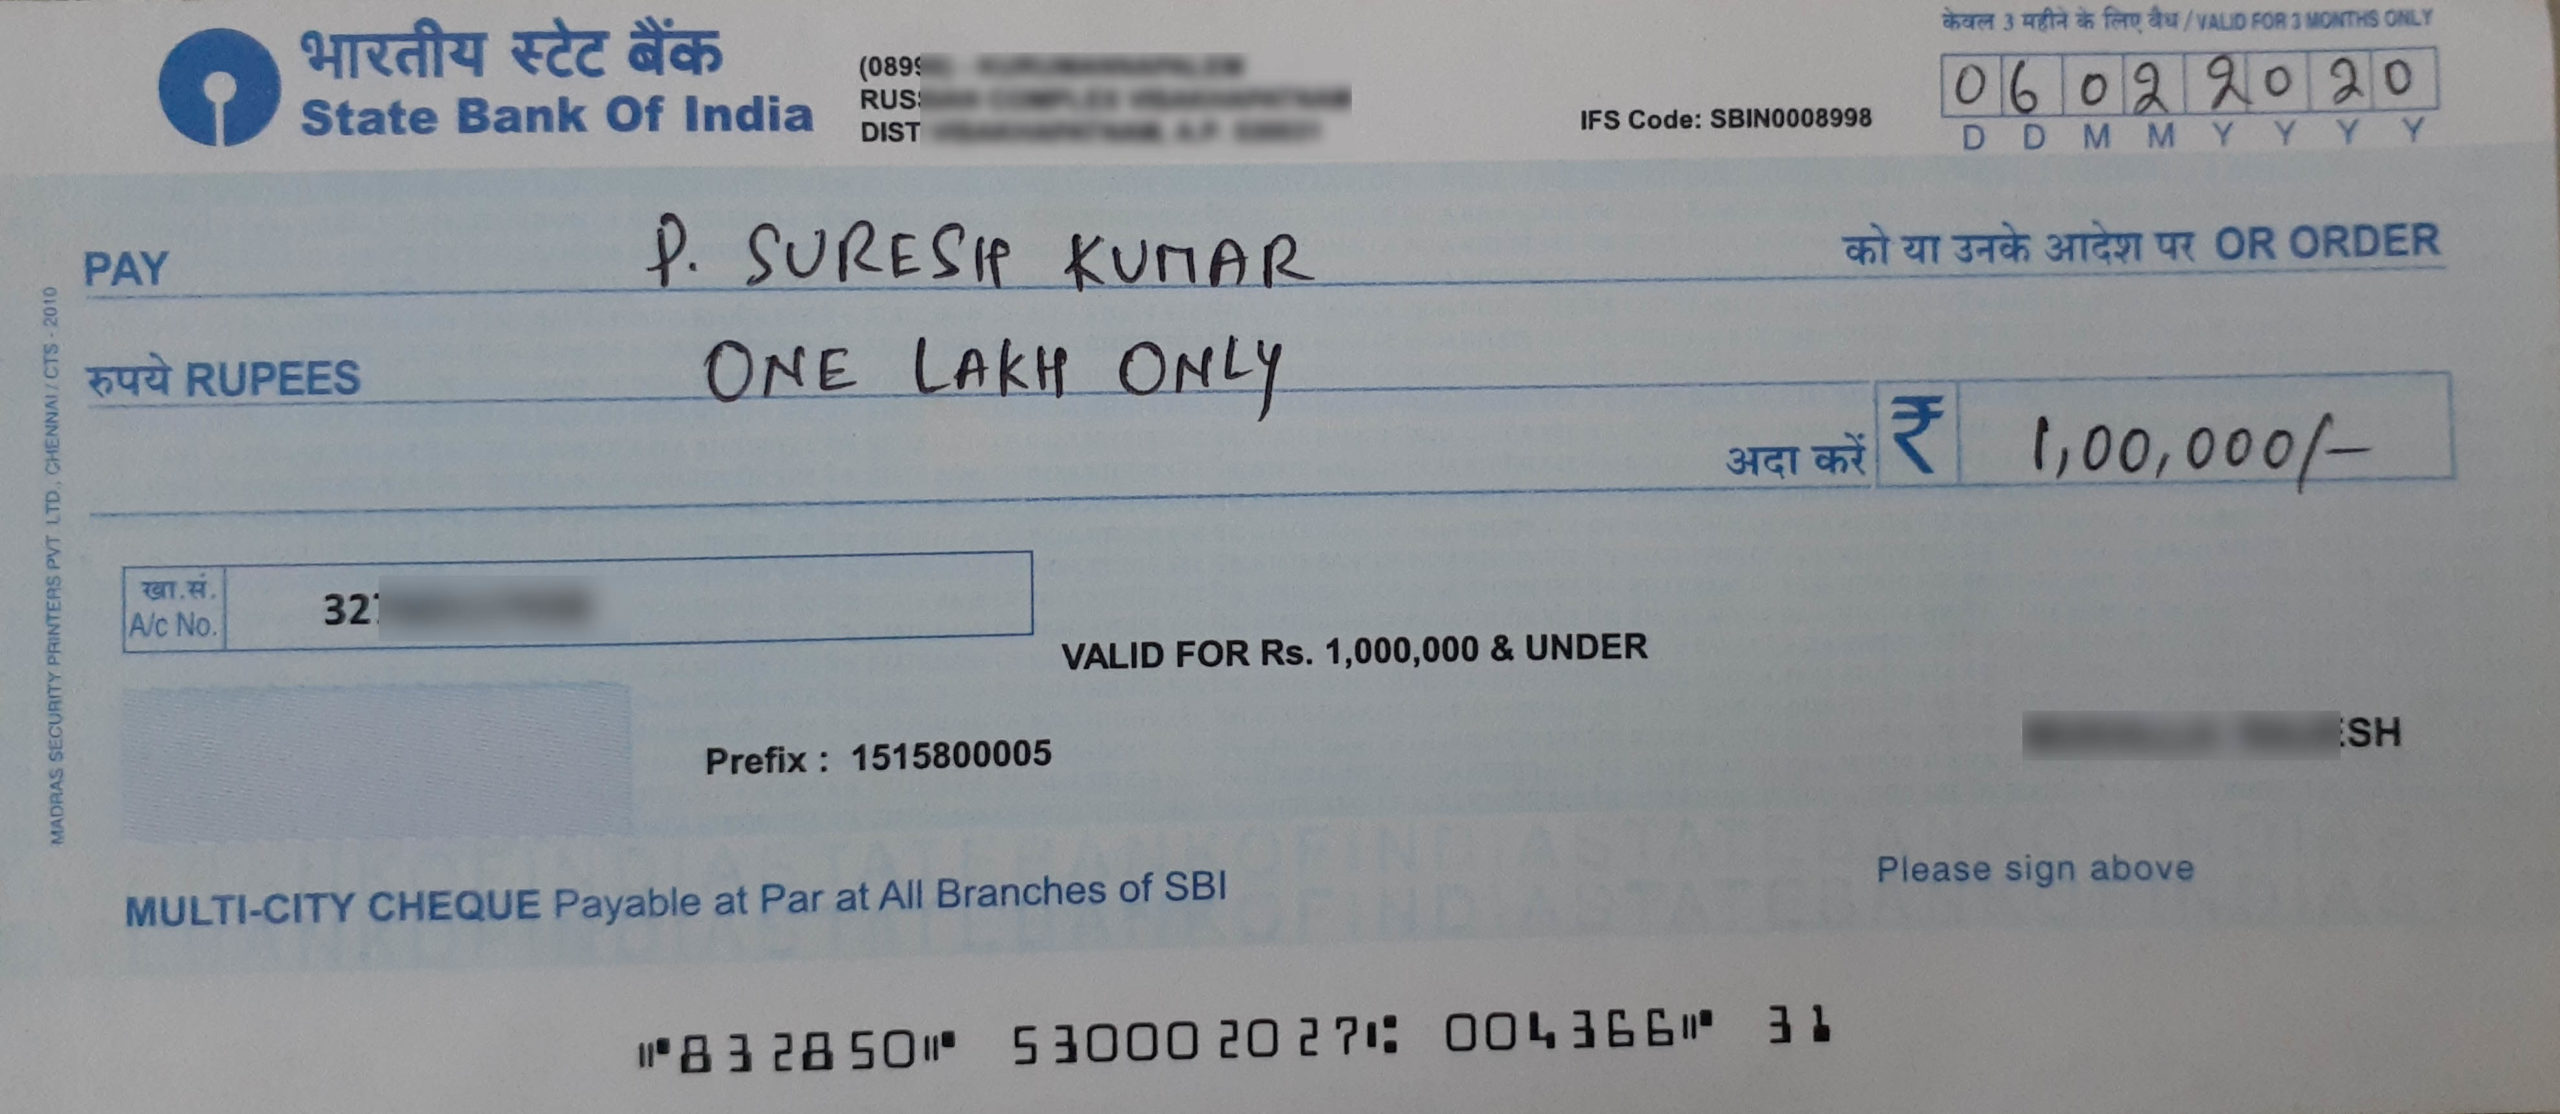 How to write one lakh rupees only on cheque image